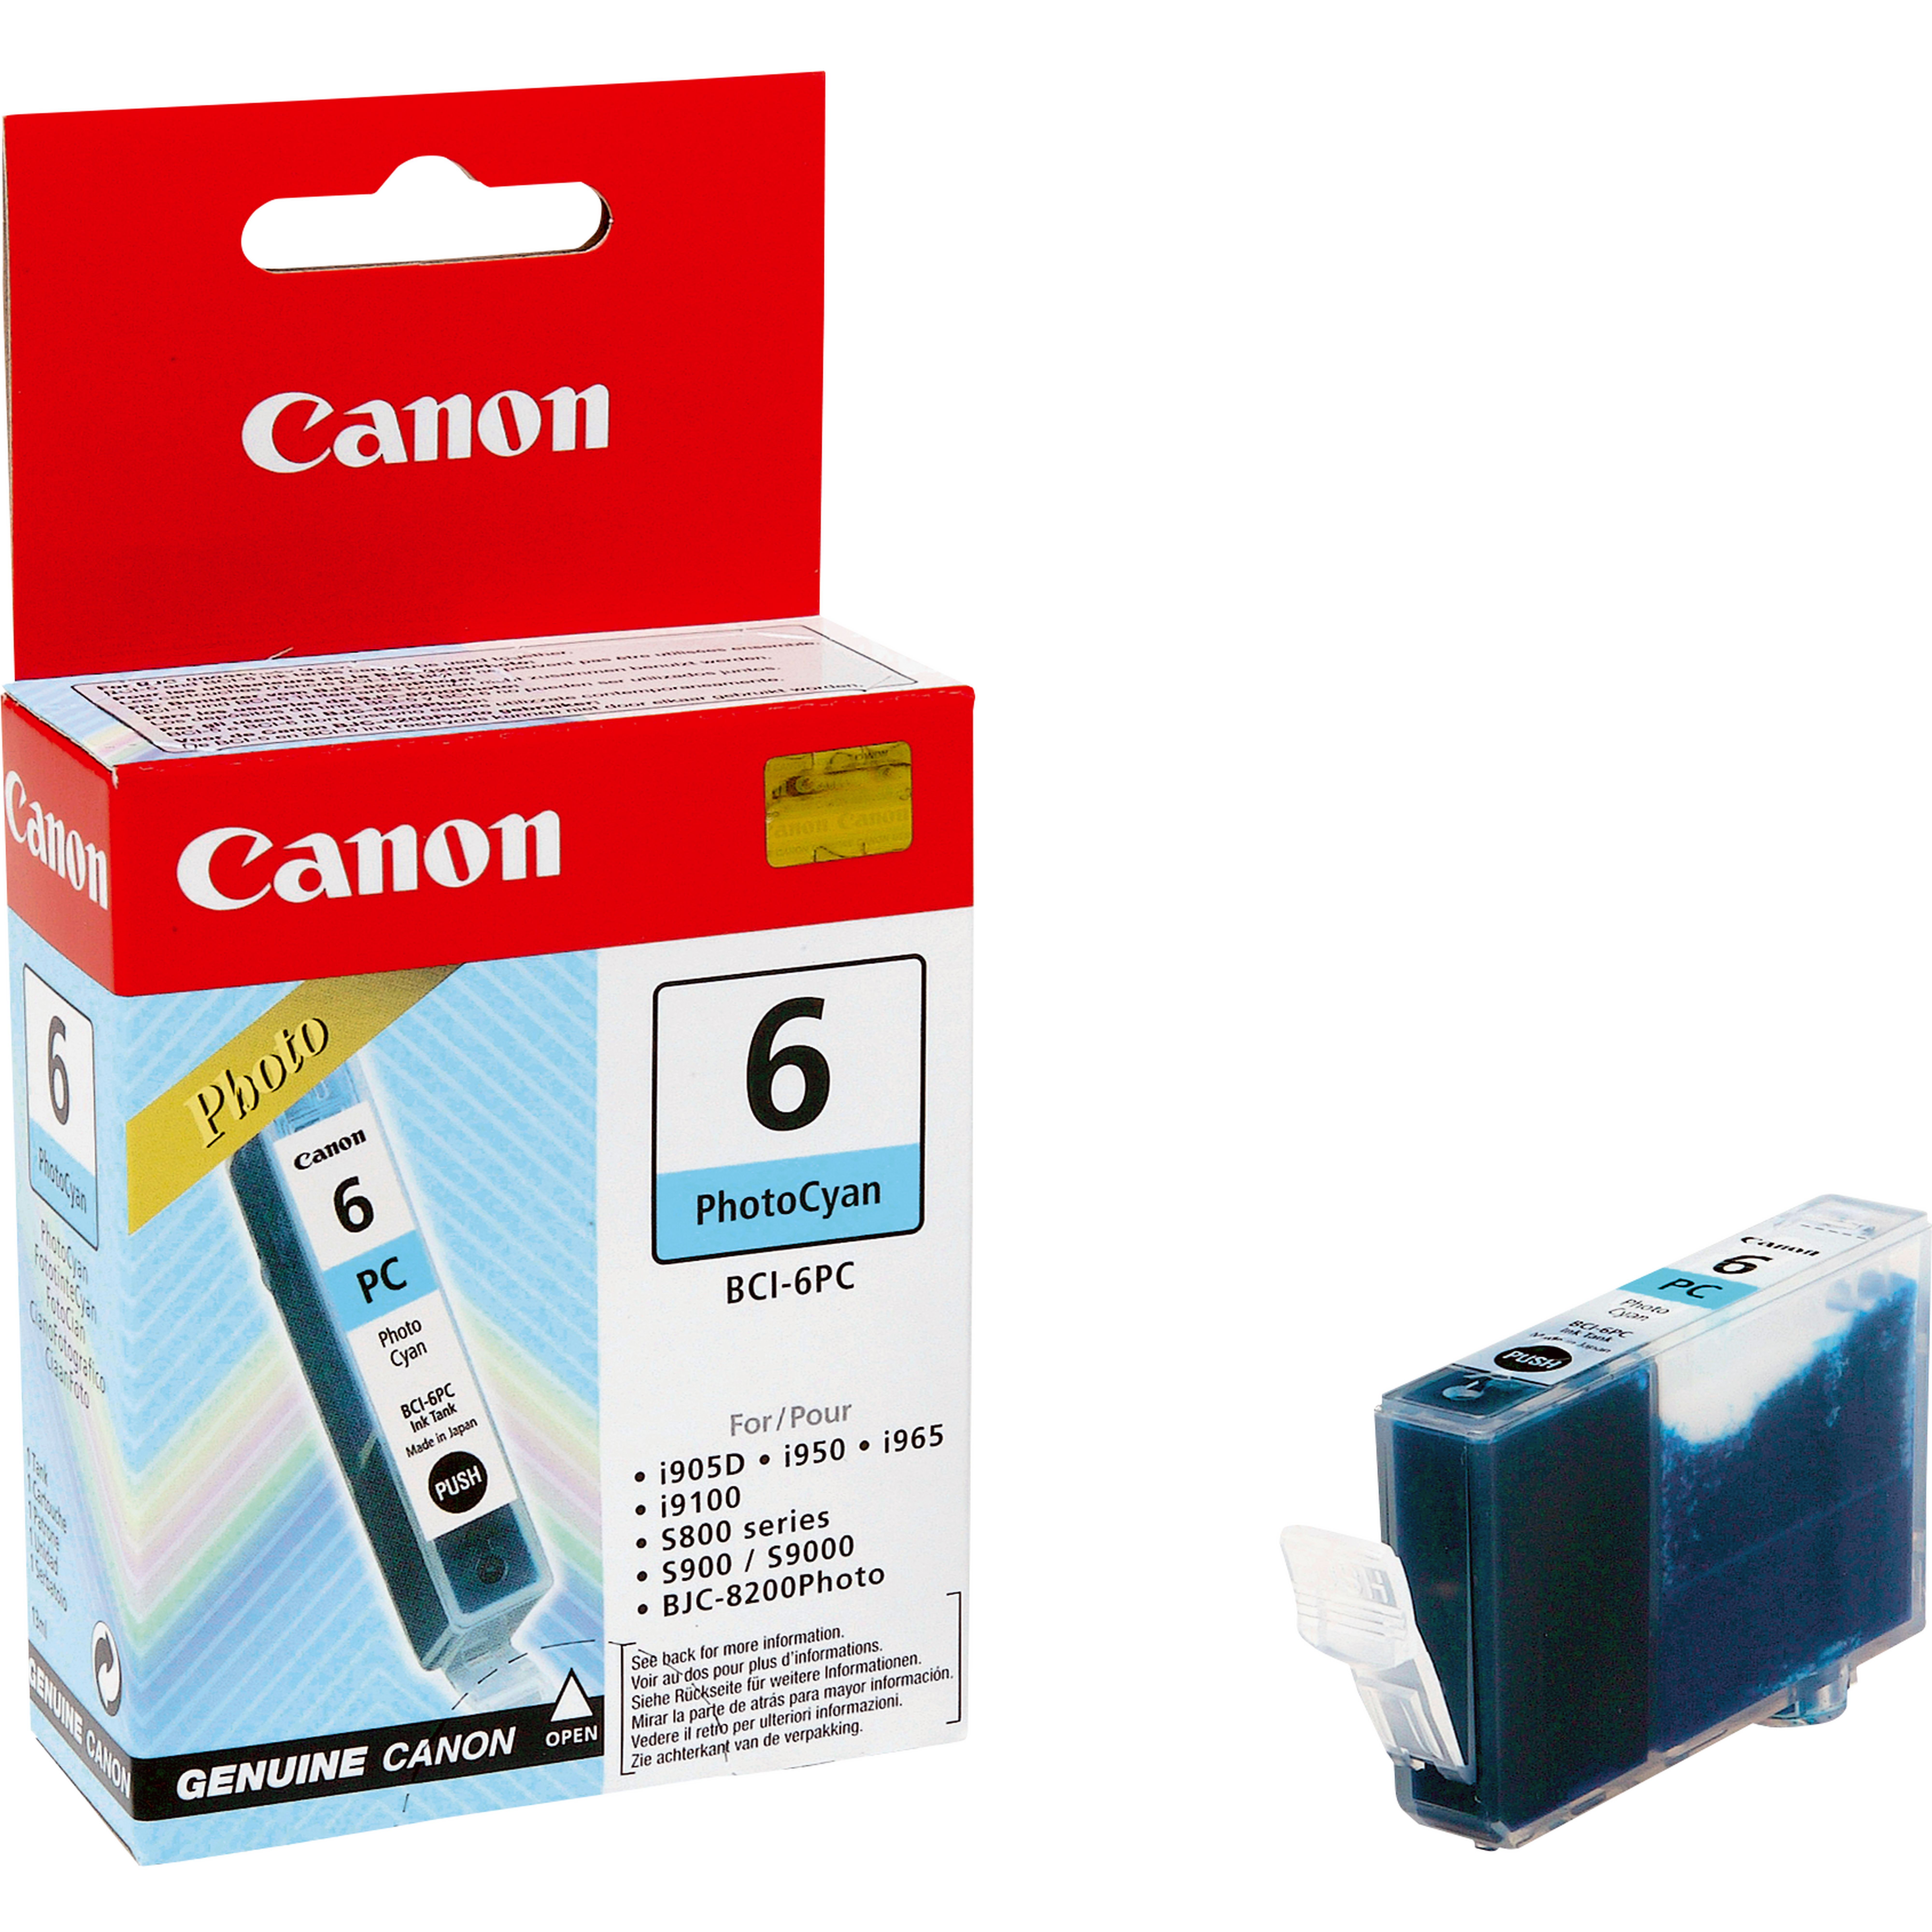 Canon 4709A002 single pack / foto cyaan